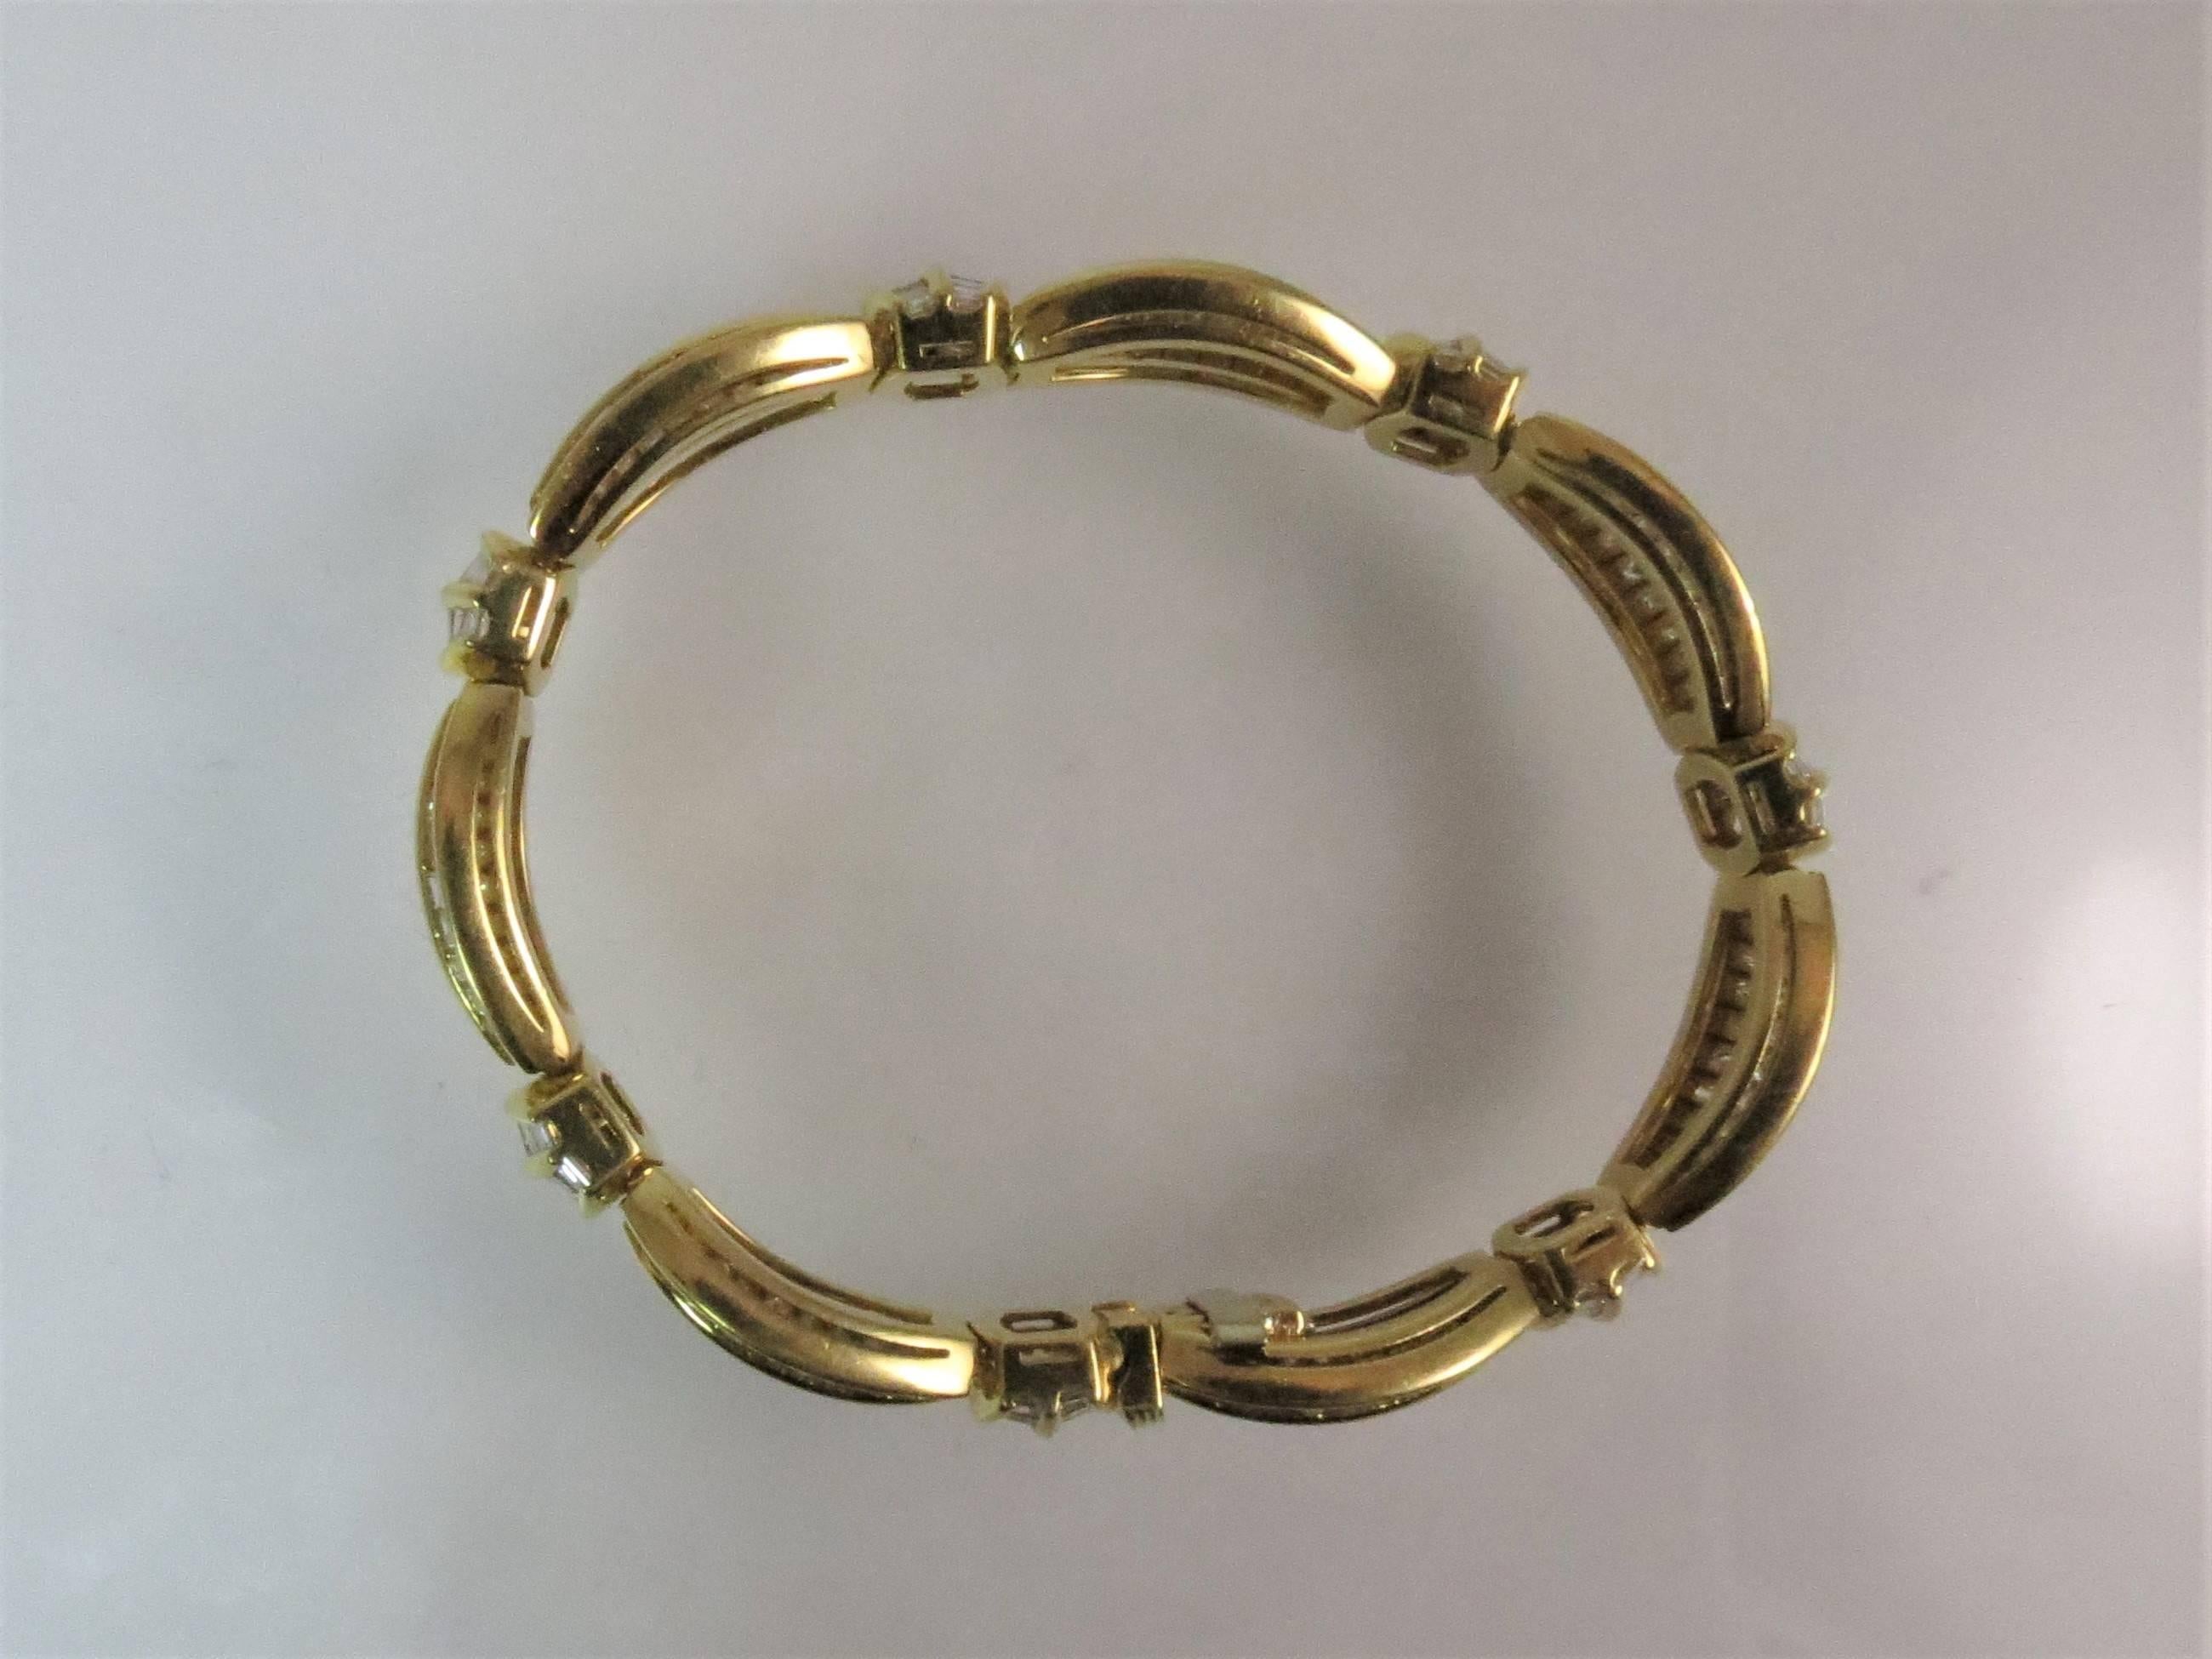 18K yellow gold flexible bracelet, set with 315 baguette diamonds weighing 16.82cts, G-H color, VS clarity.